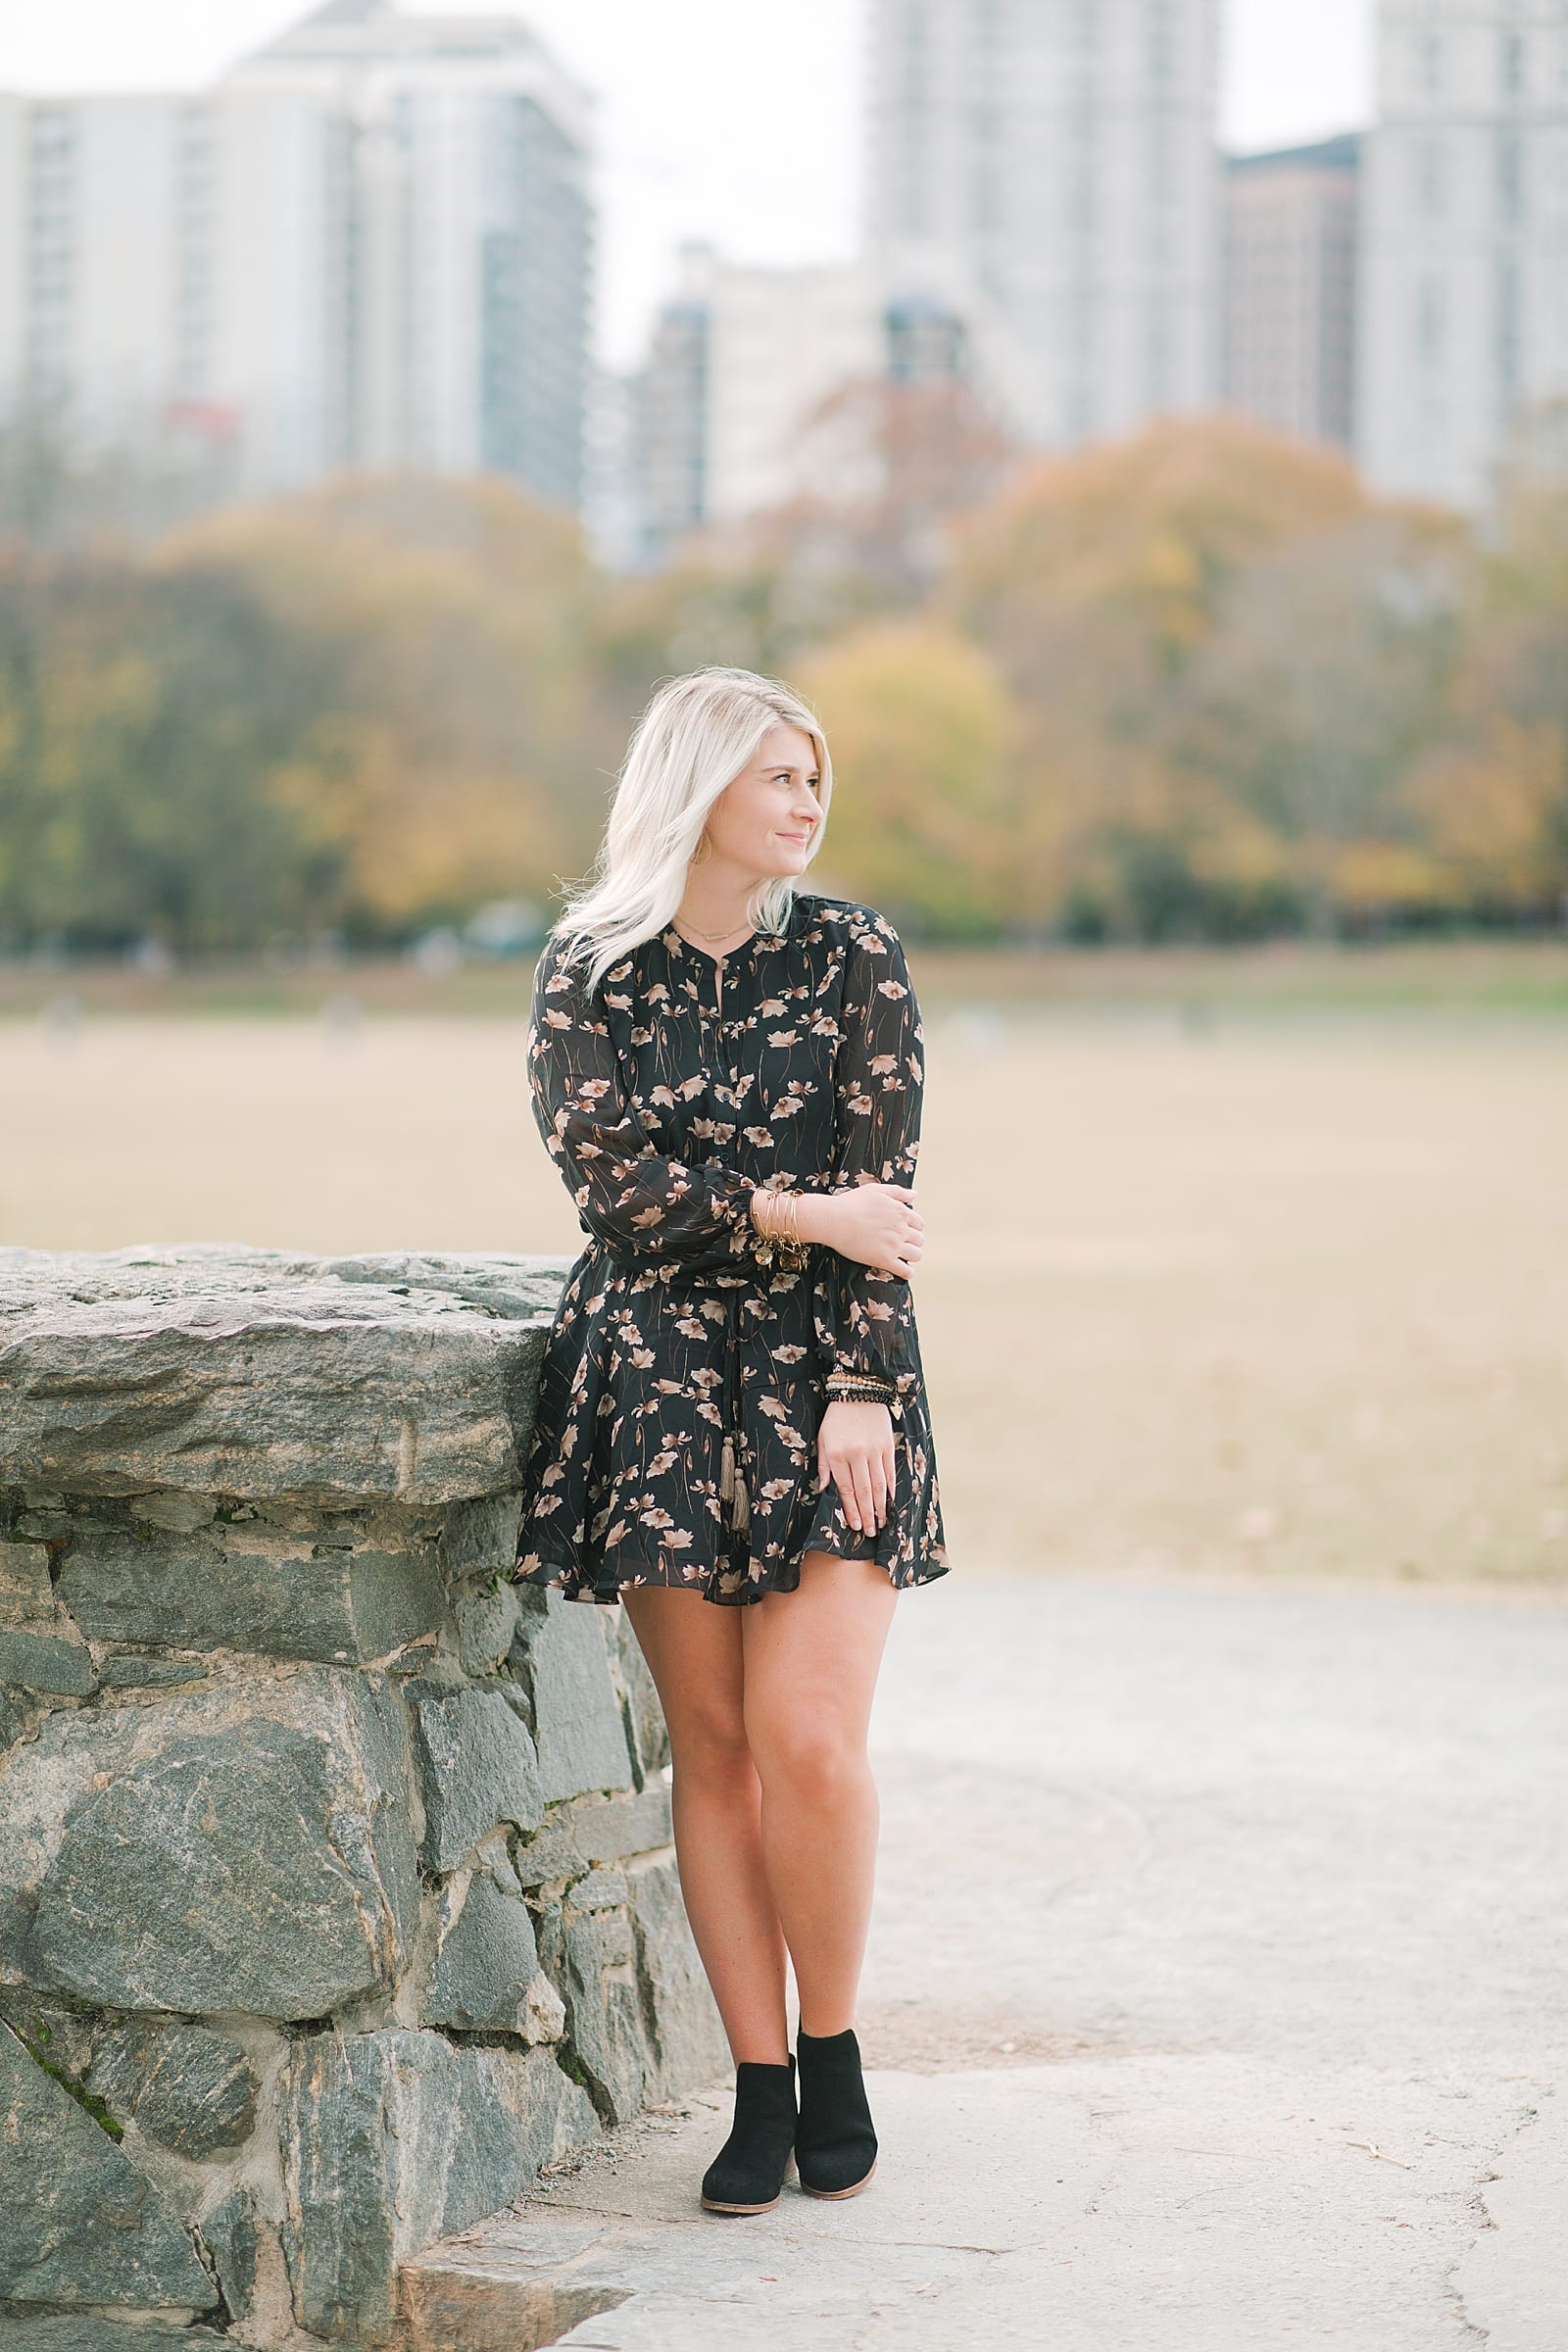 Girl Leaning on Stone Wall with City in Background in Atlanta Photo